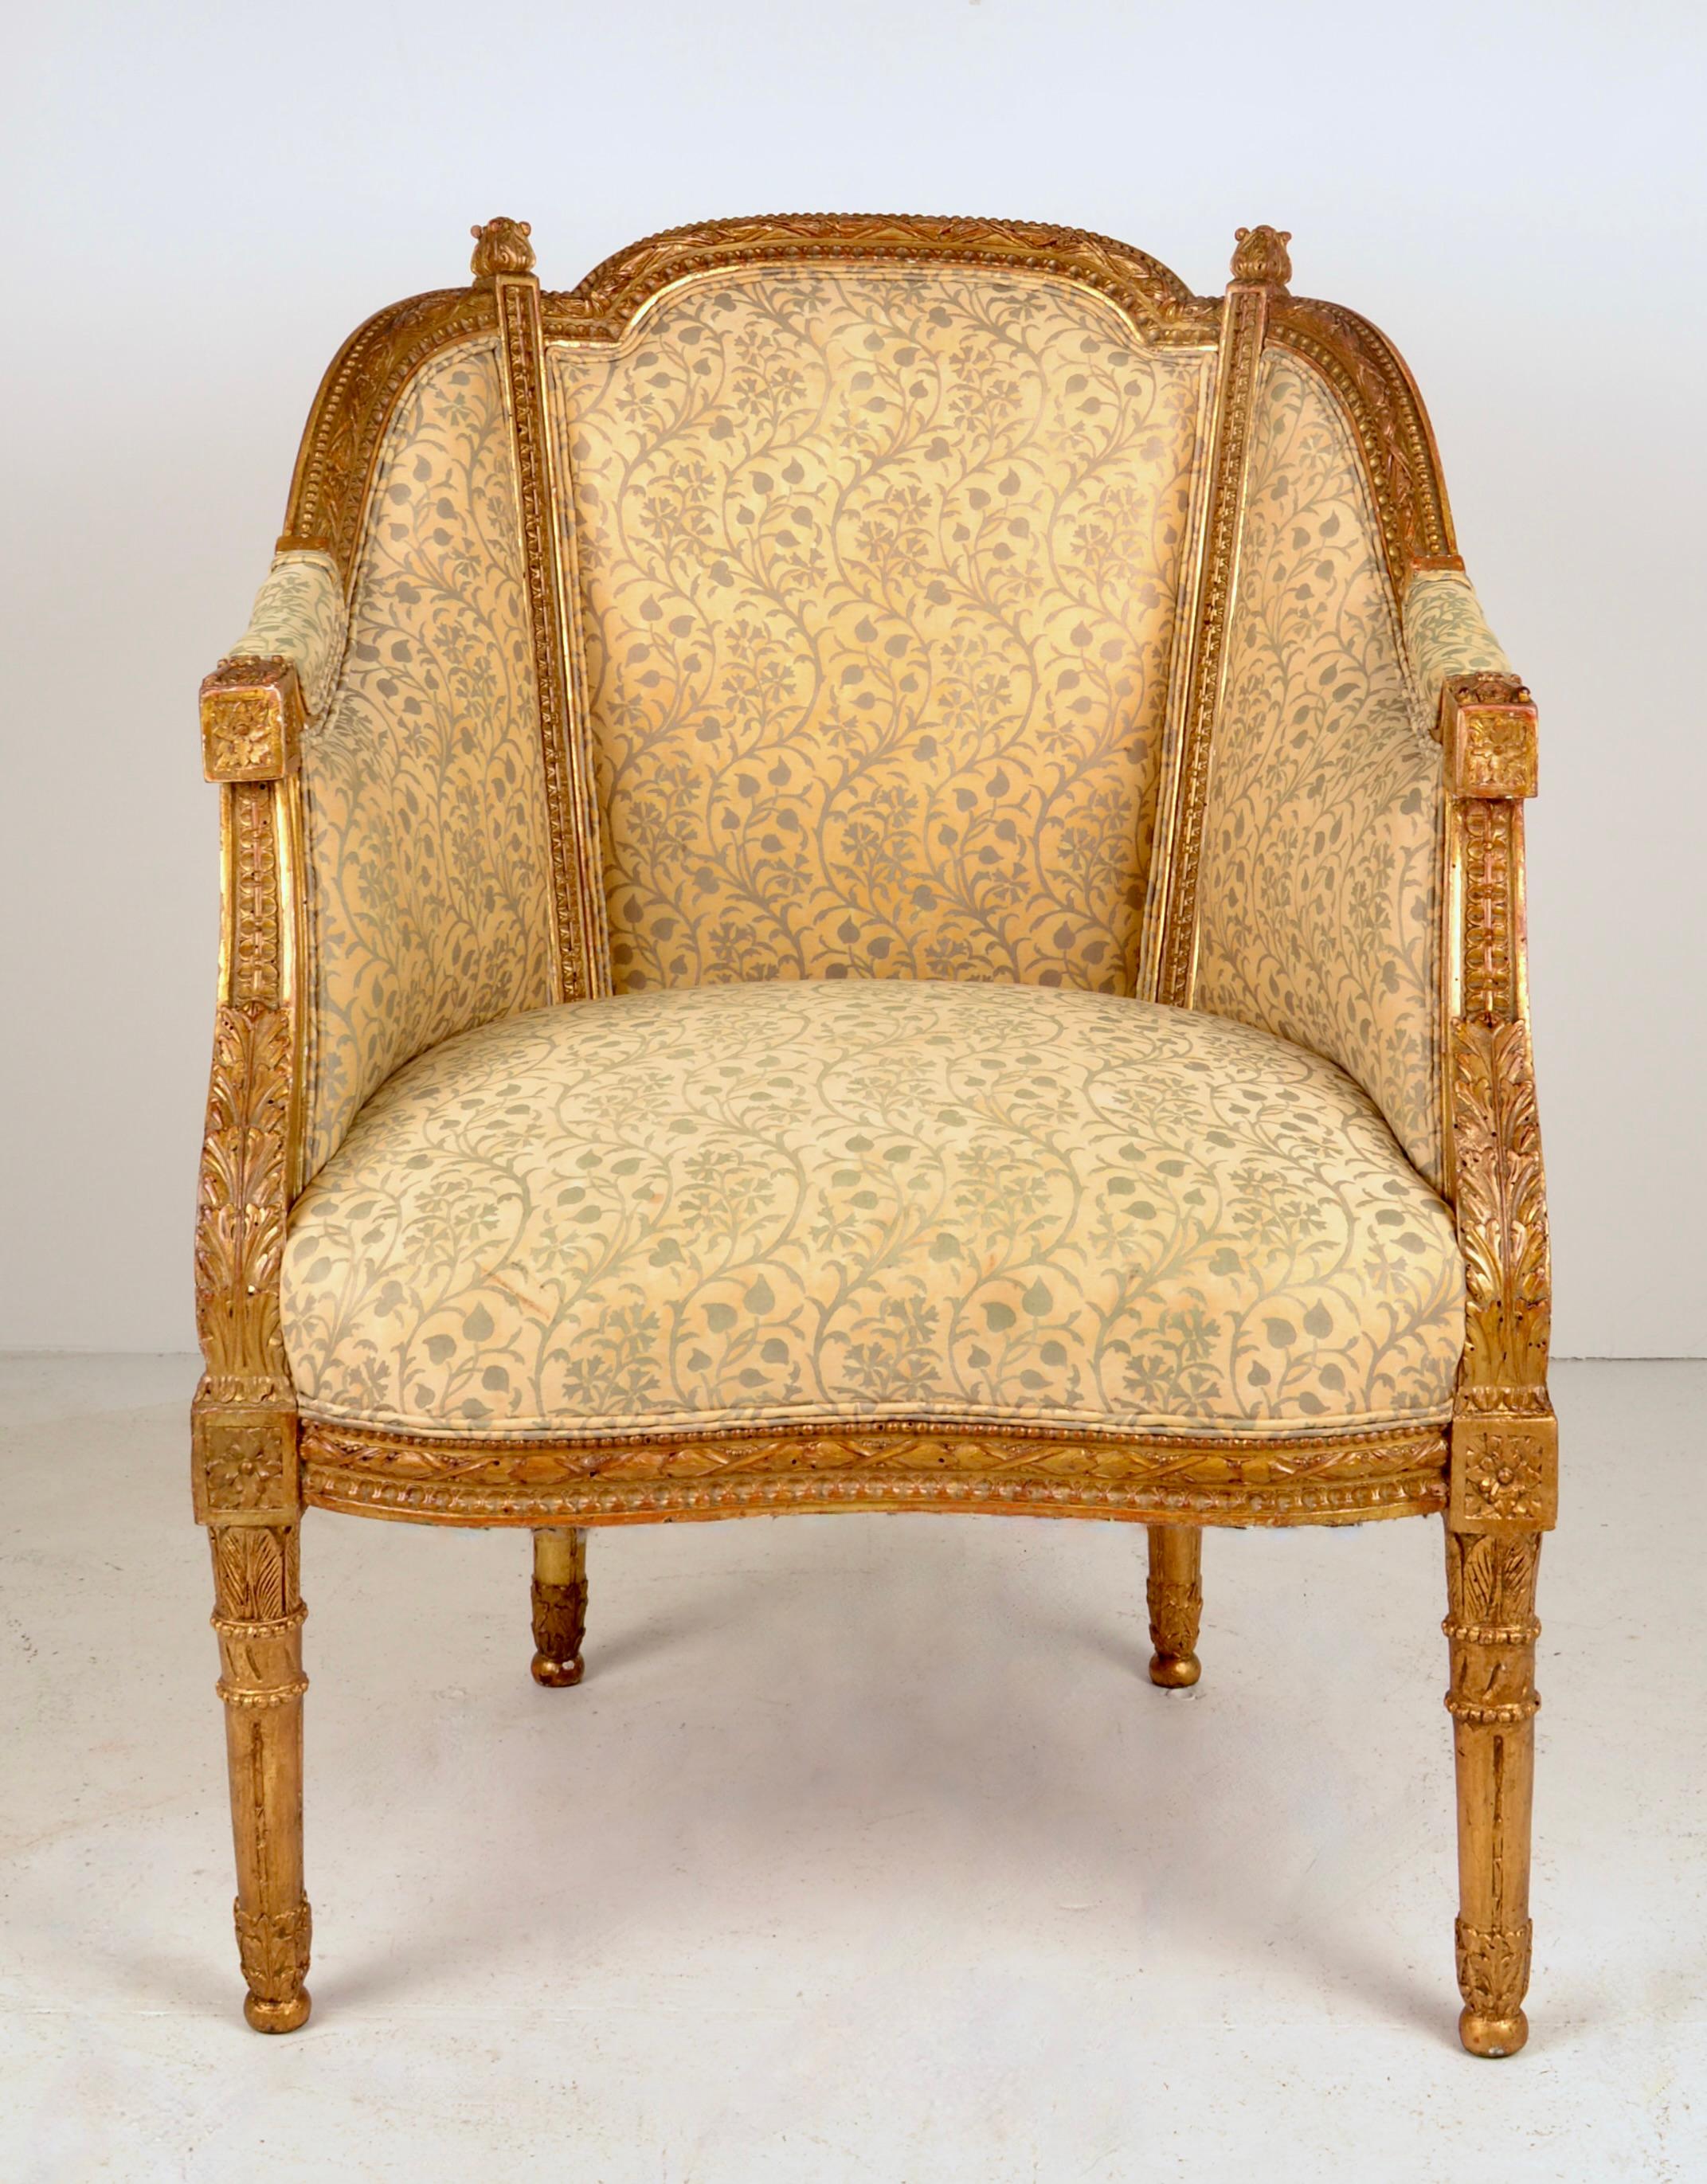 A lovely example of a traditional French bergere updated with a Fortuny hand printed upholstery fabric. Original gilding on hand carved frame in very fine condition. Tight seat and fully upholstered back. 